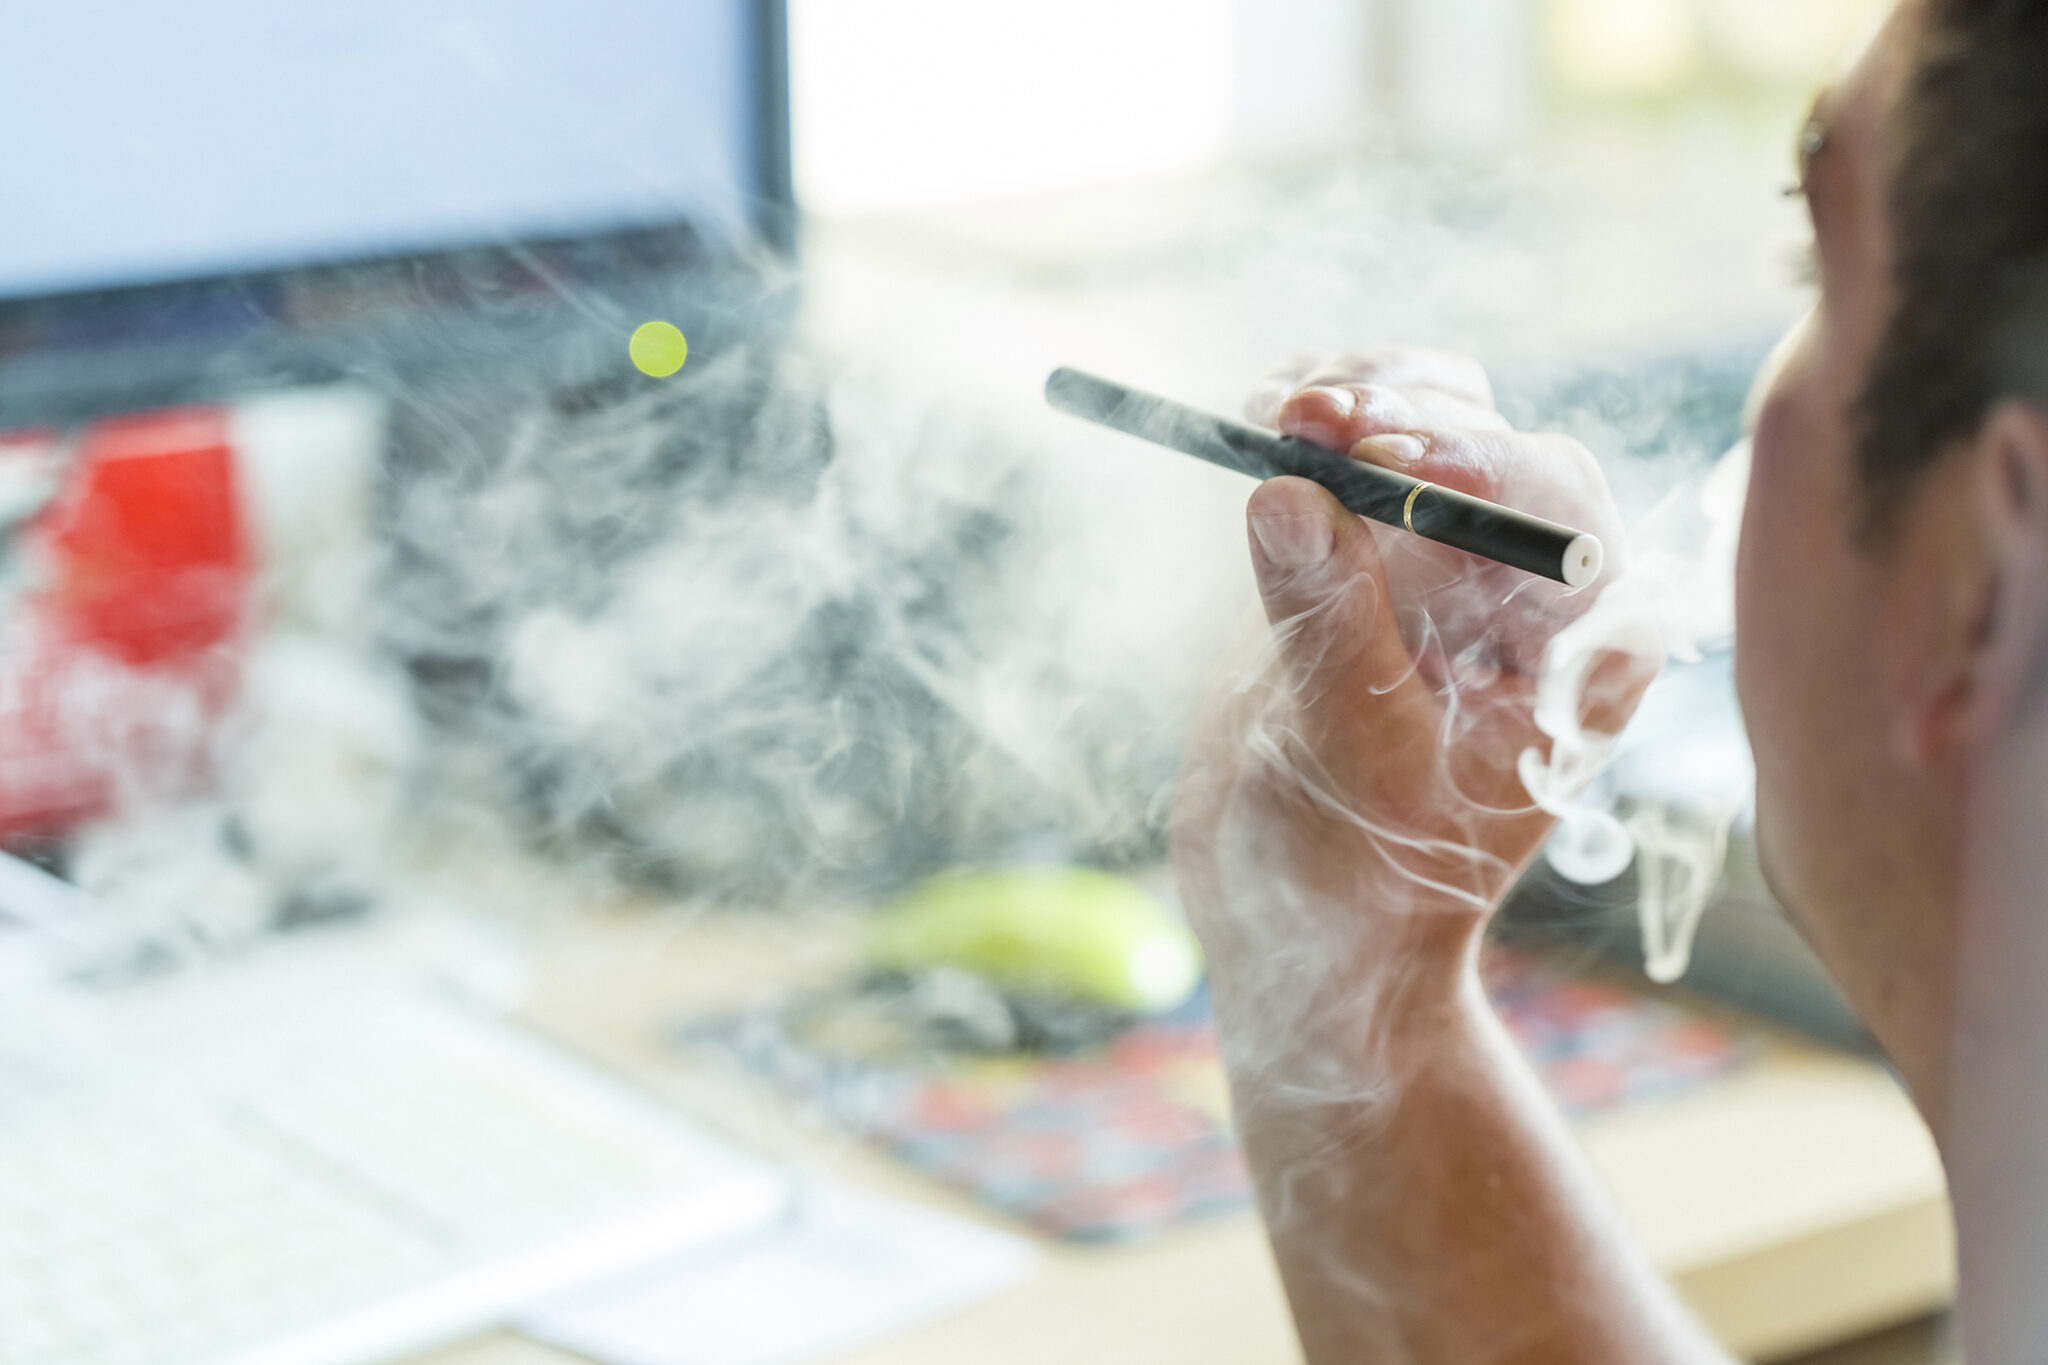 Physically active teens more likely to vape